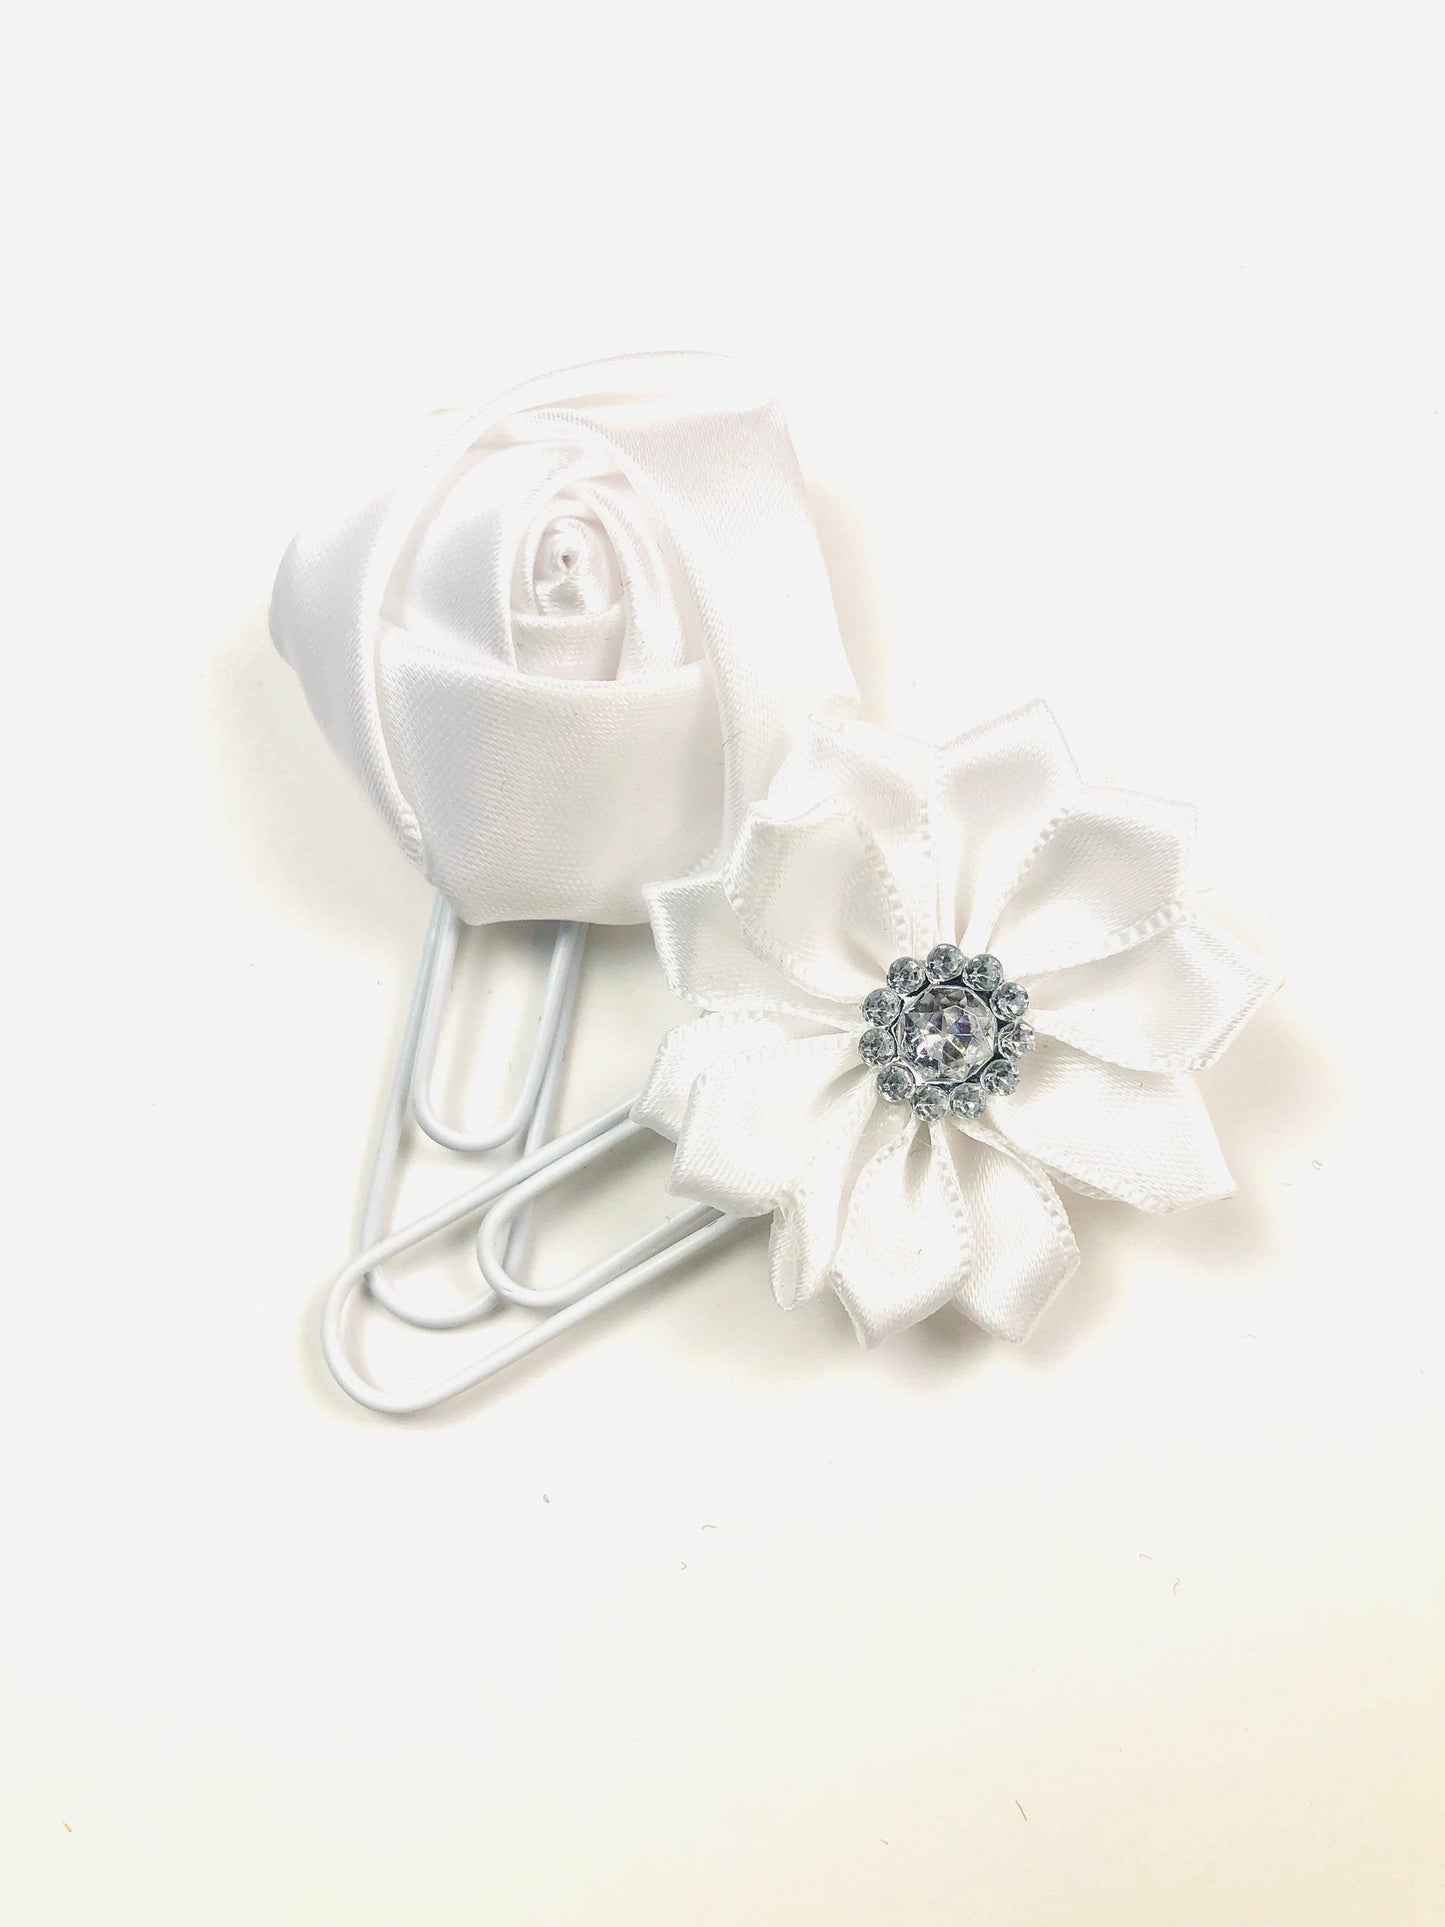 Floral Planner Charm Clips | Planner Clips |   Planner Accessories | Book Marks | Travelers Notebook Clips | Stationary Gifts